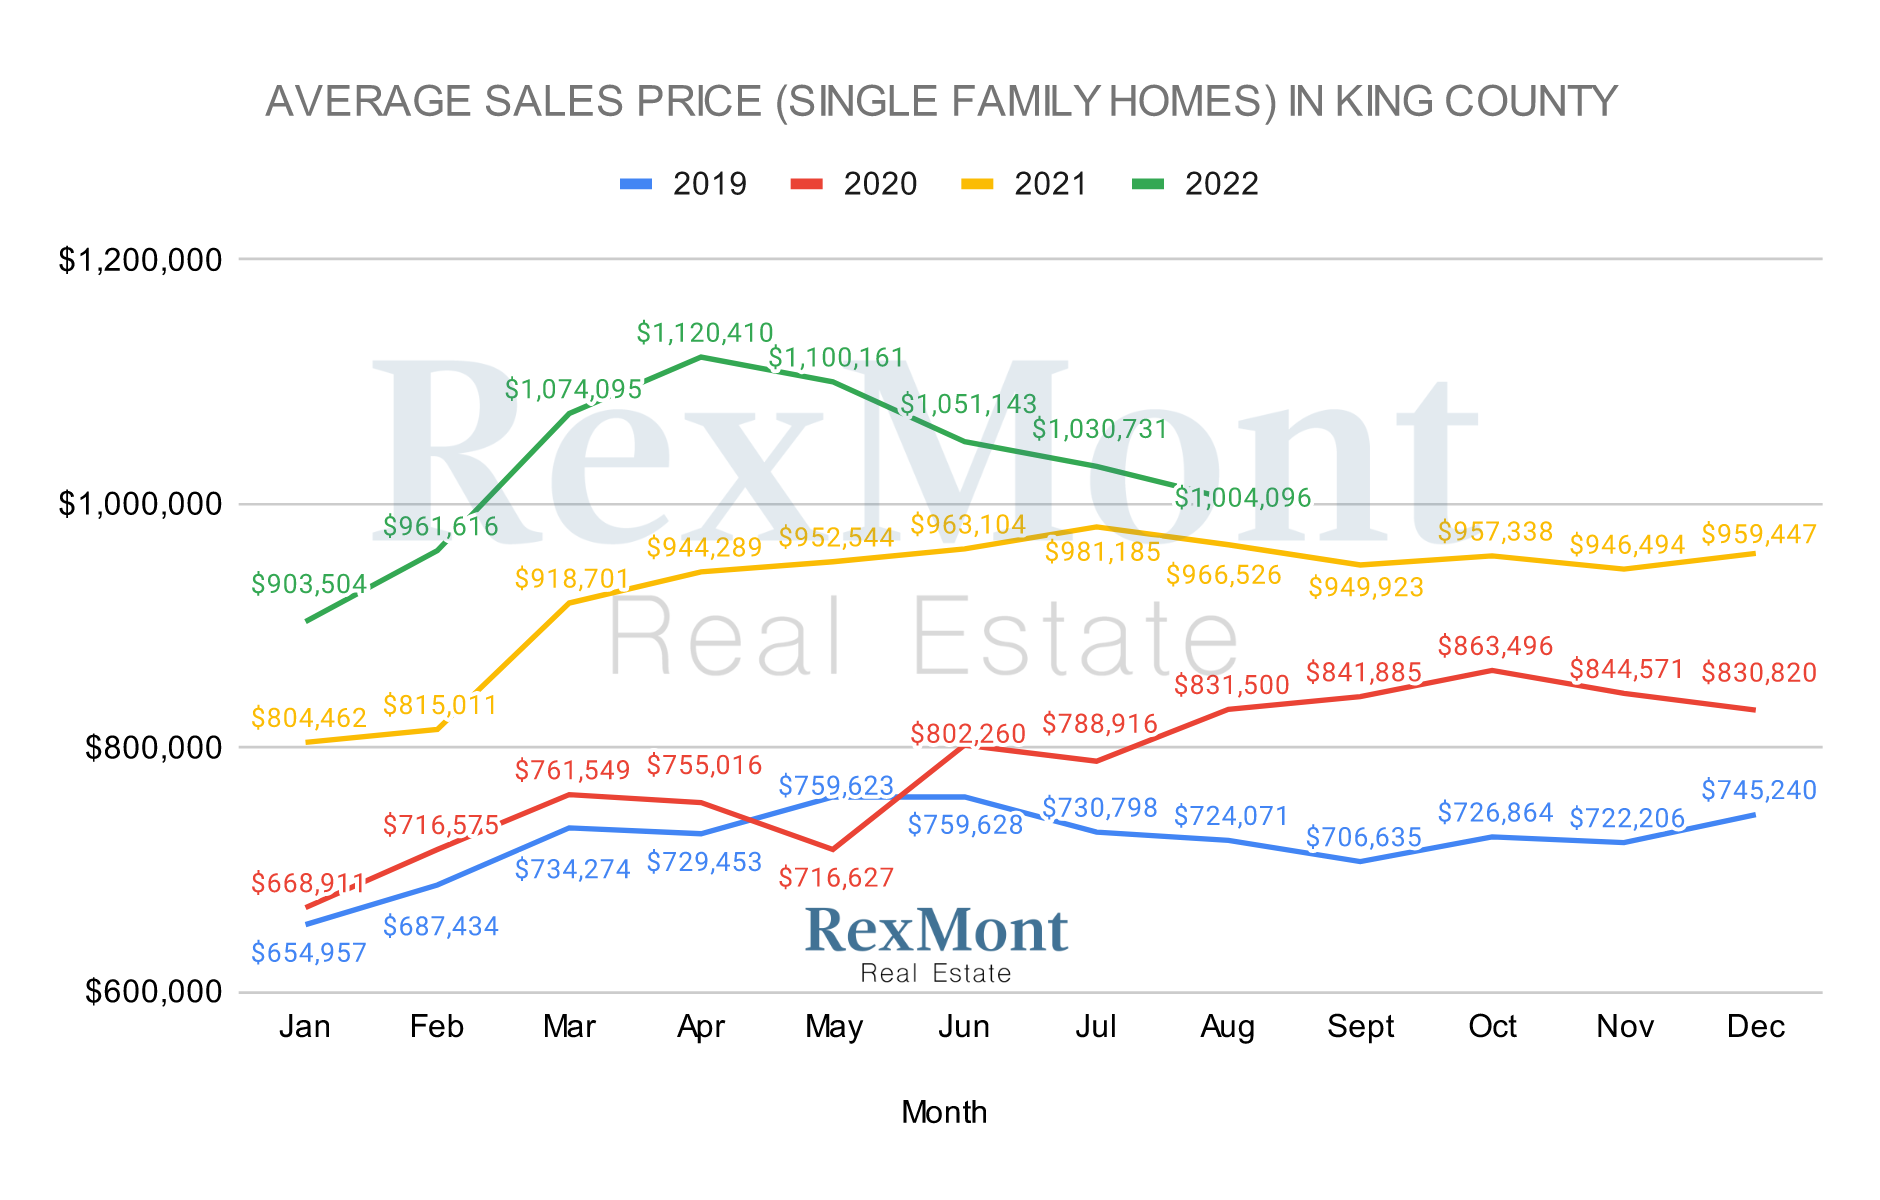 Graph of King County Average Home Price for Single Family Homes in King County